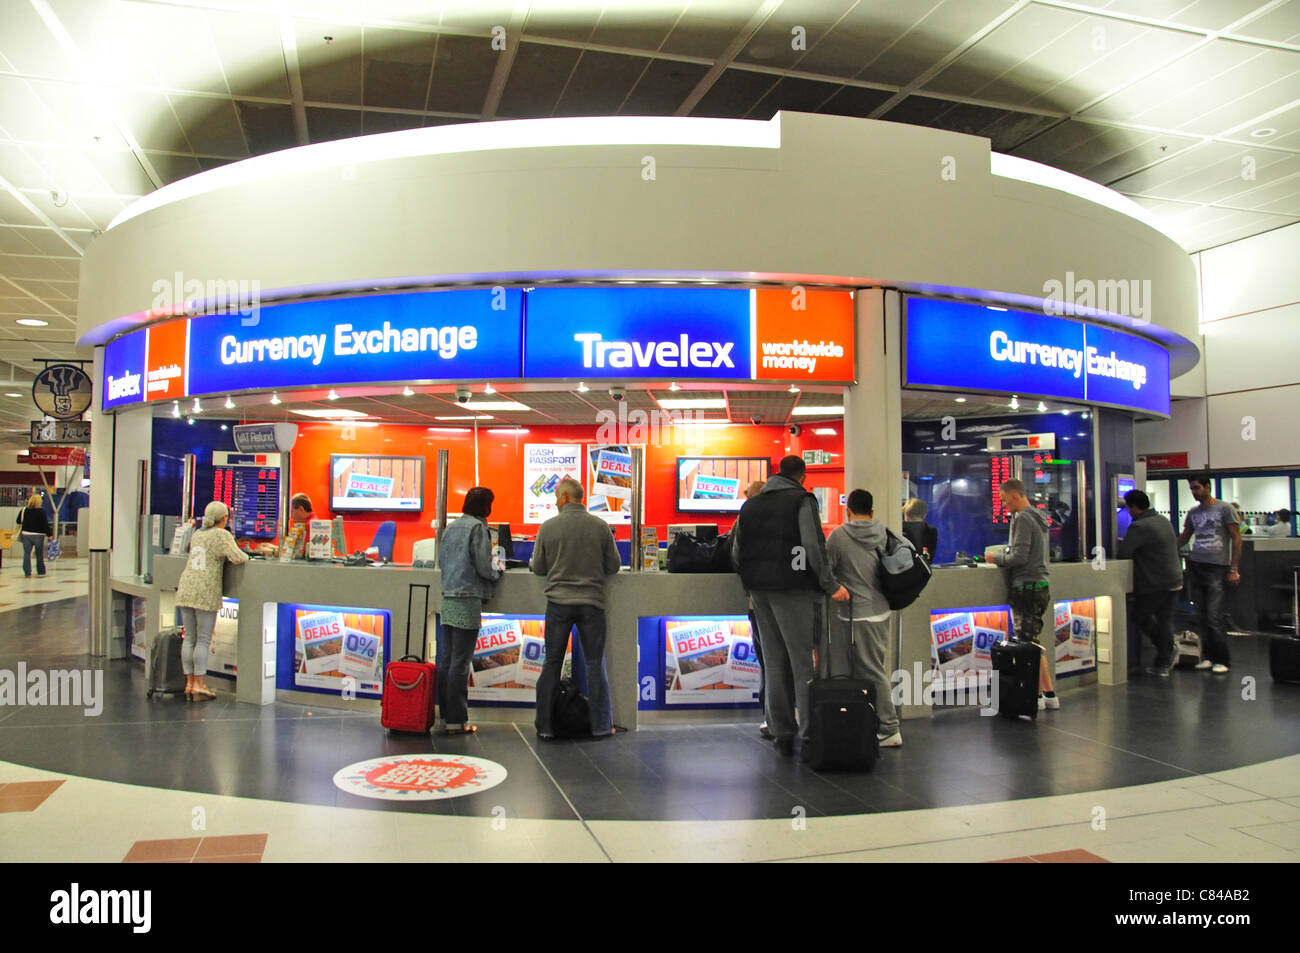 Travelex Currency Exchange in departures, North Terminal, London Gatwick Airport, Crawley, West Sussex, England, United Kingdom Stock Photo